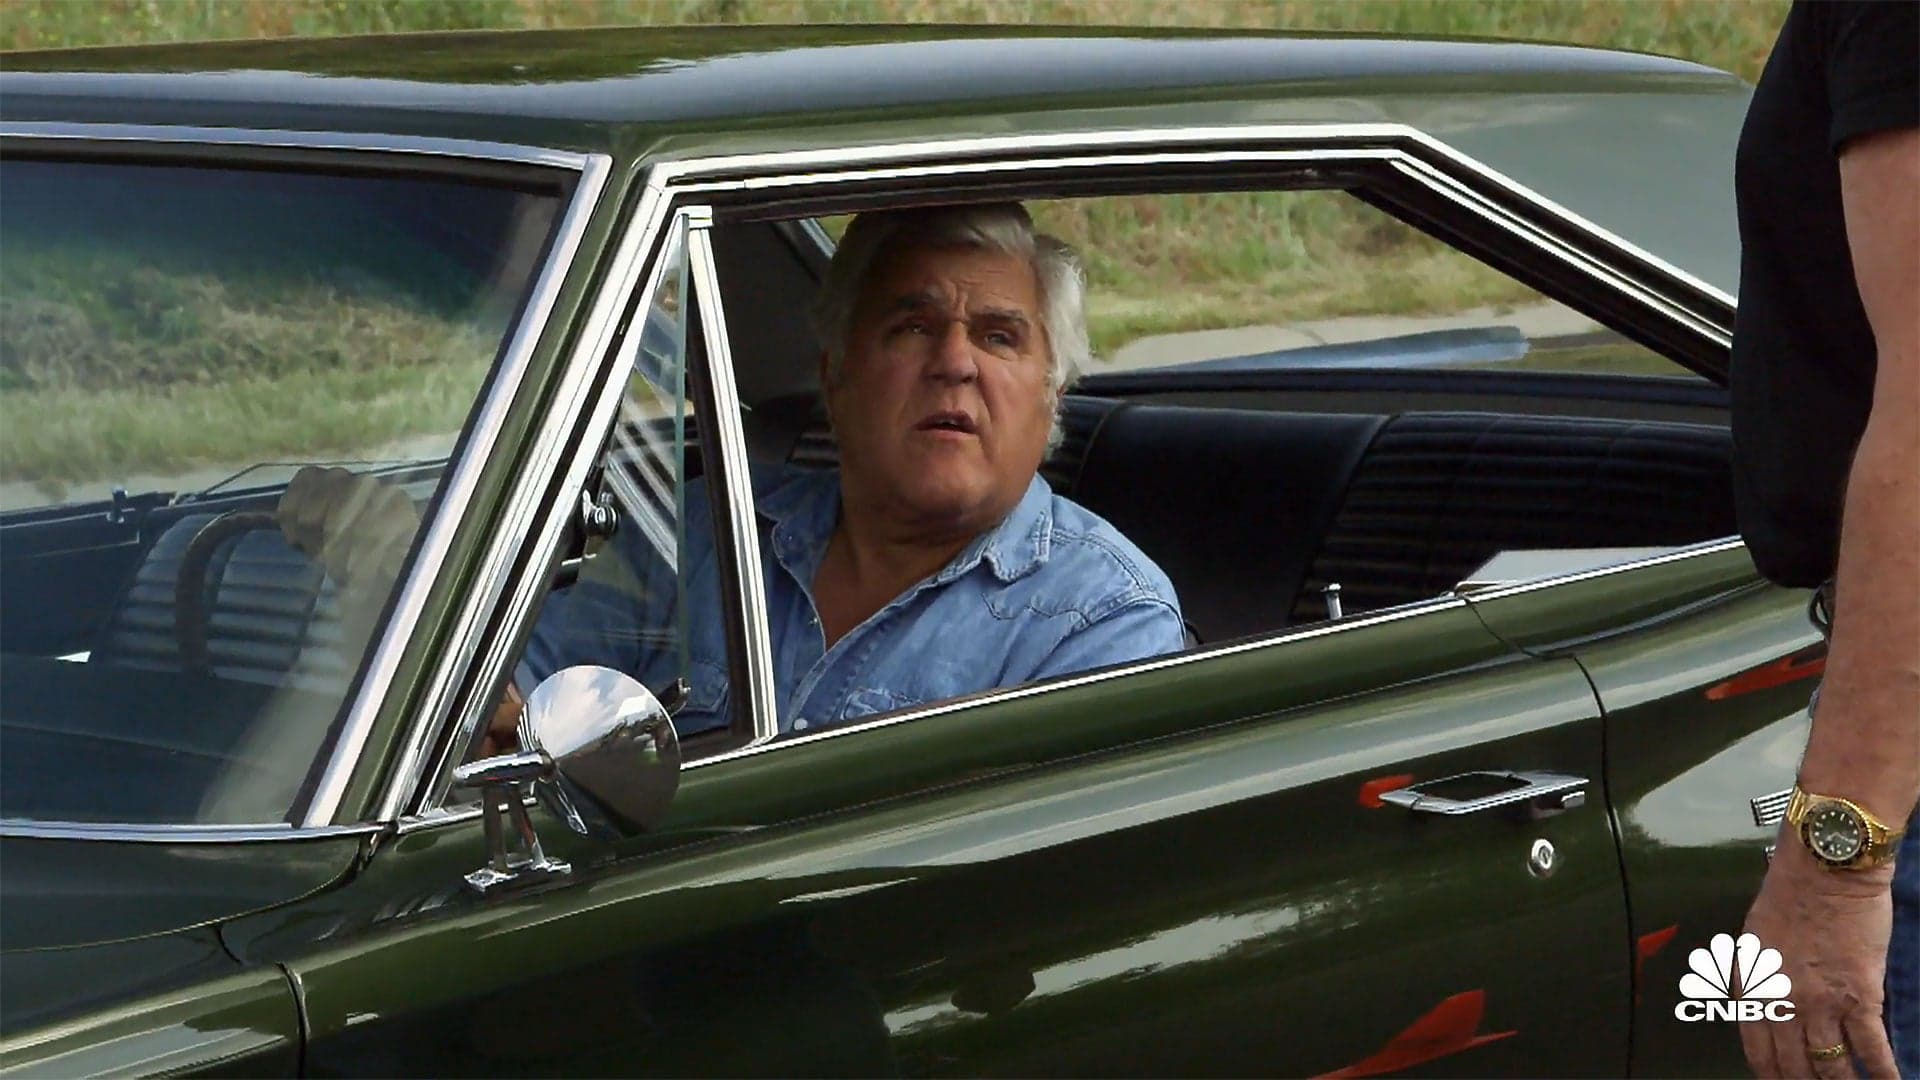 15 Interesting Facts From the Jay Leno’s Garage Season Finale